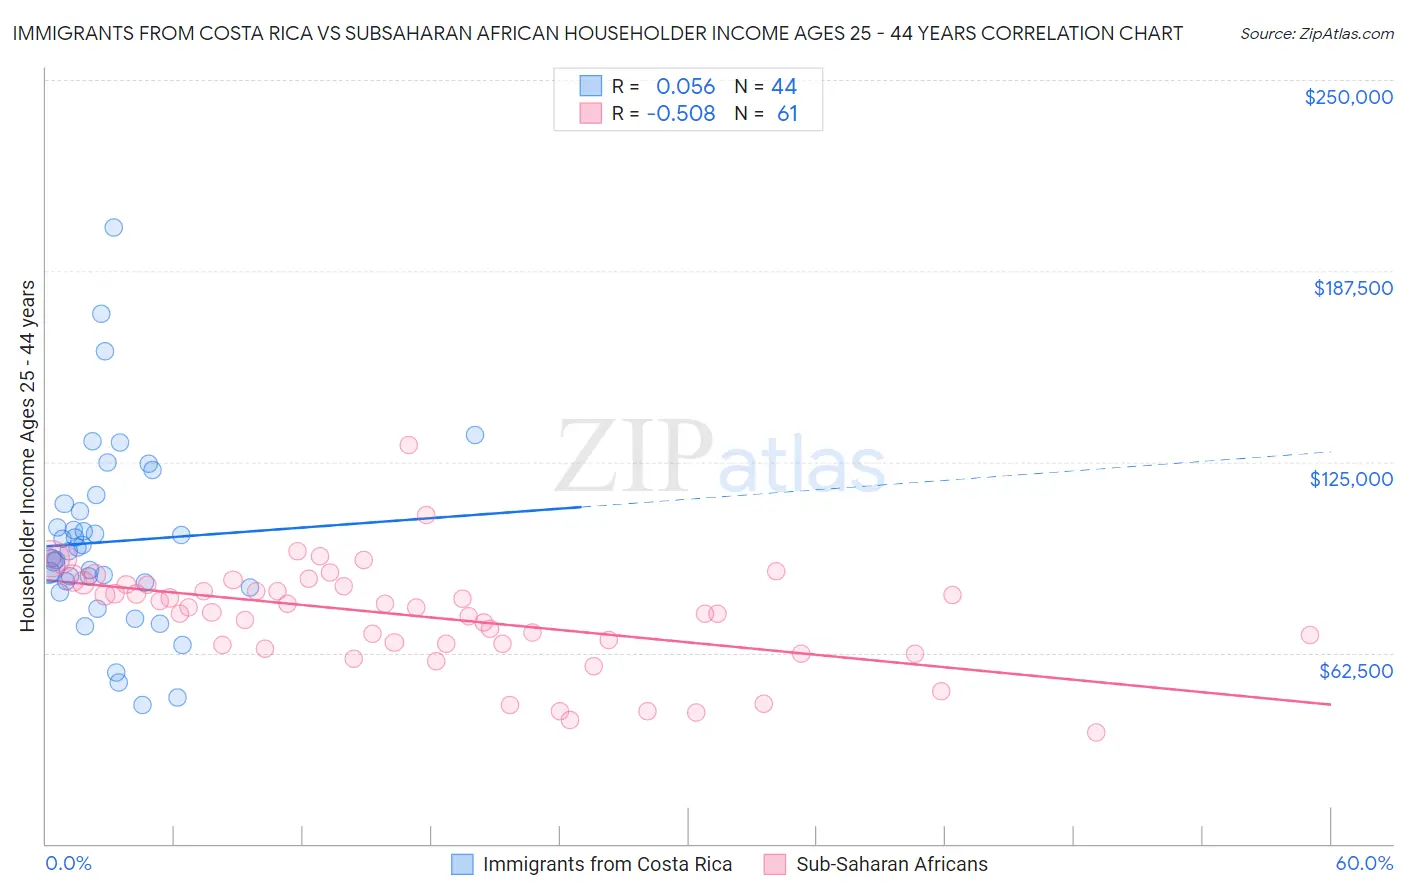 Immigrants from Costa Rica vs Subsaharan African Householder Income Ages 25 - 44 years